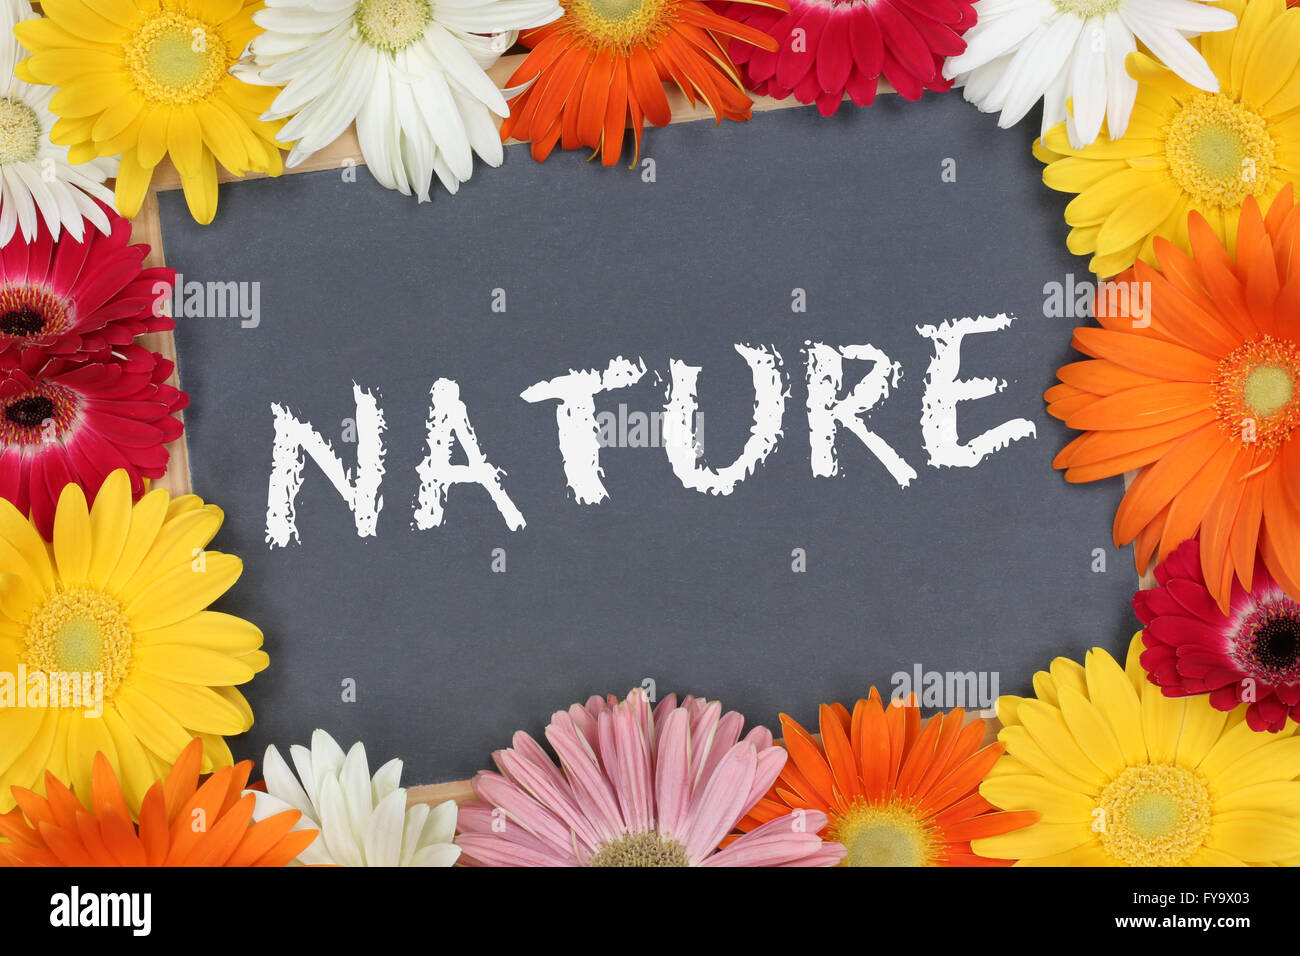 Nature garden with colorful flowers flower board sign Stock Photo